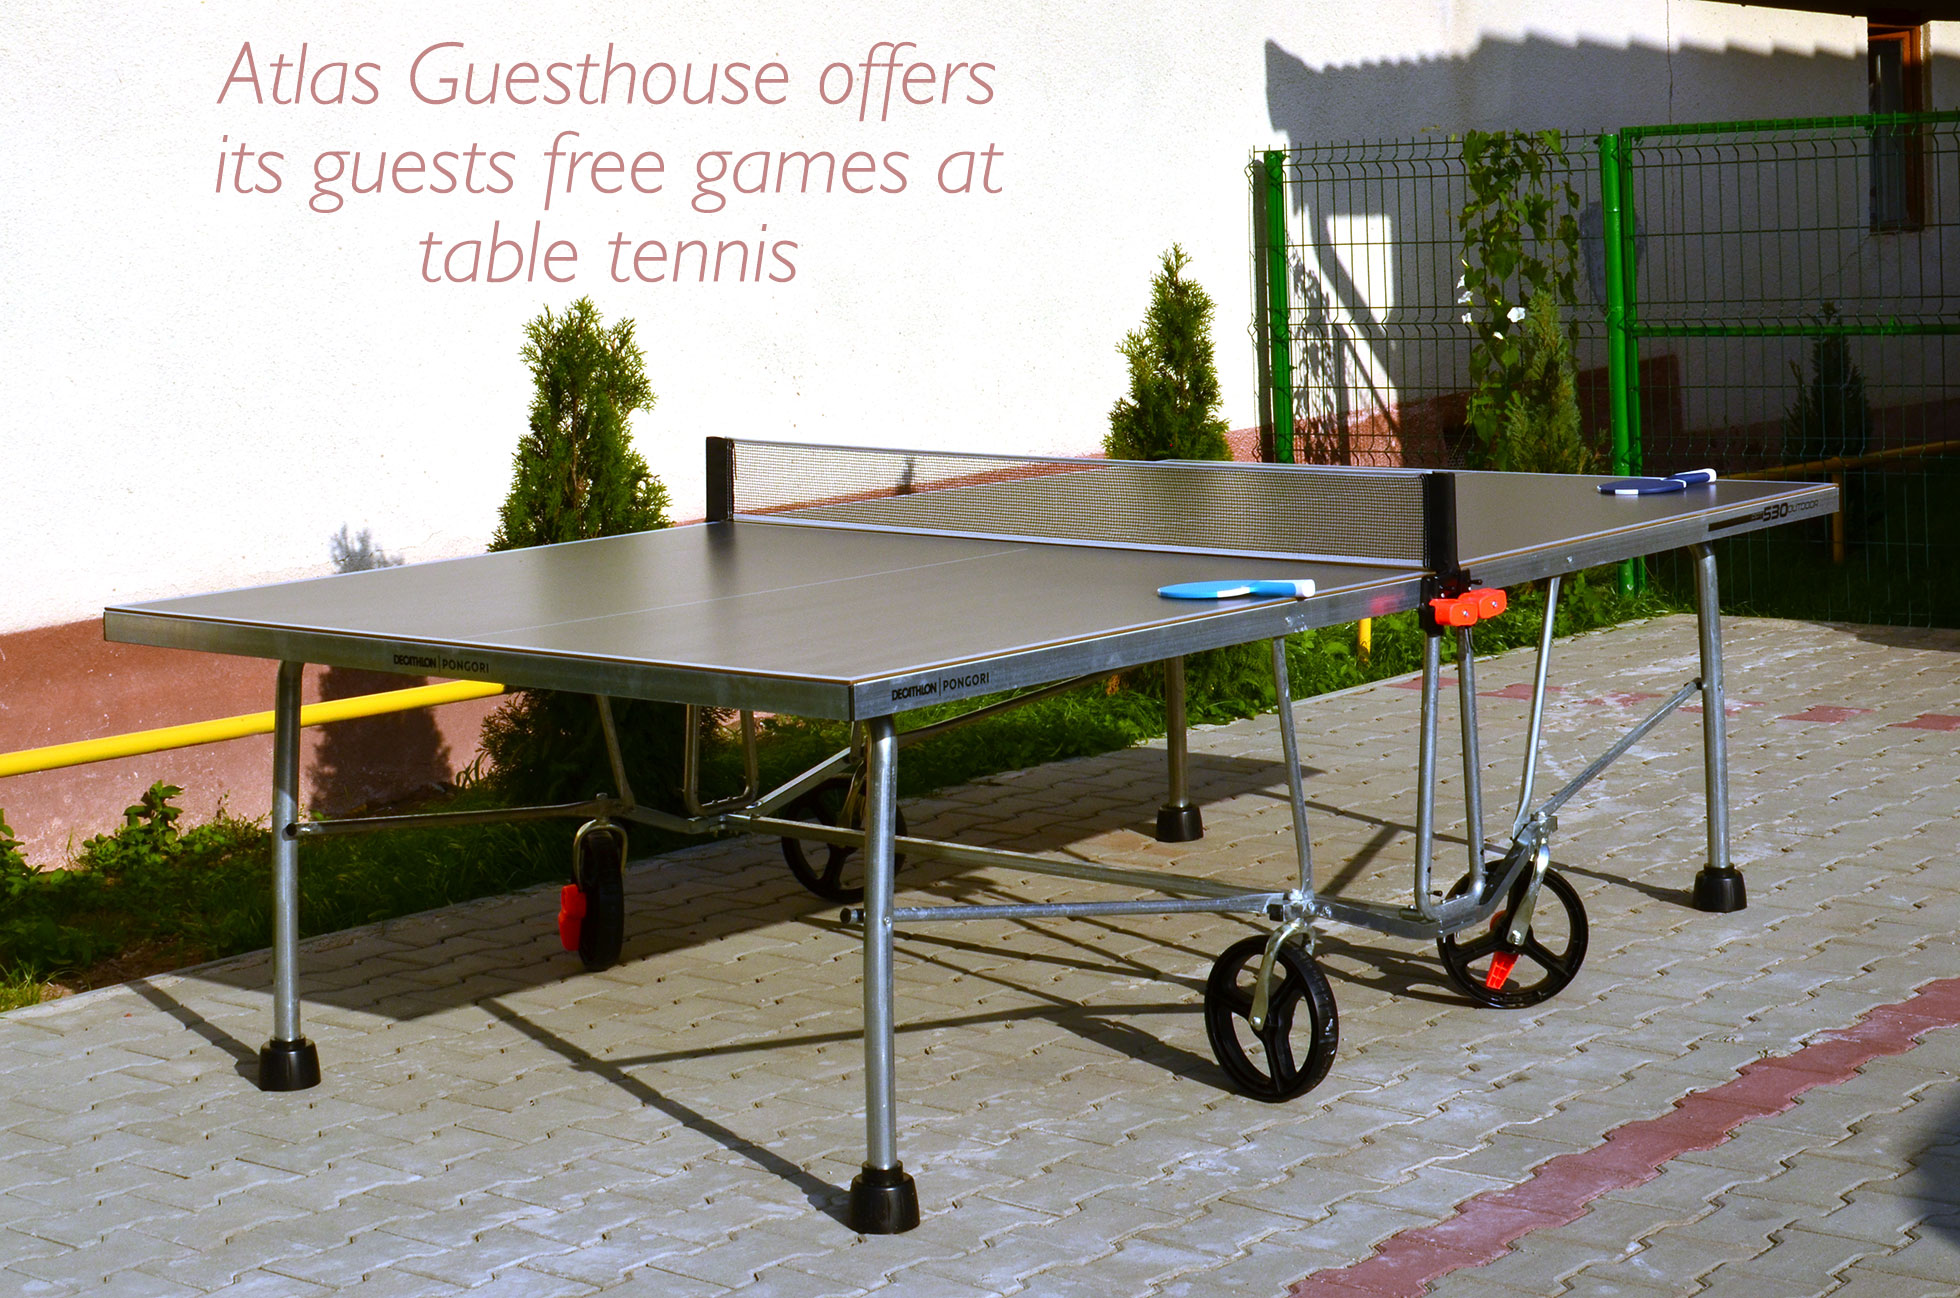 Free table tennis games offered by Atlas Guesthouse